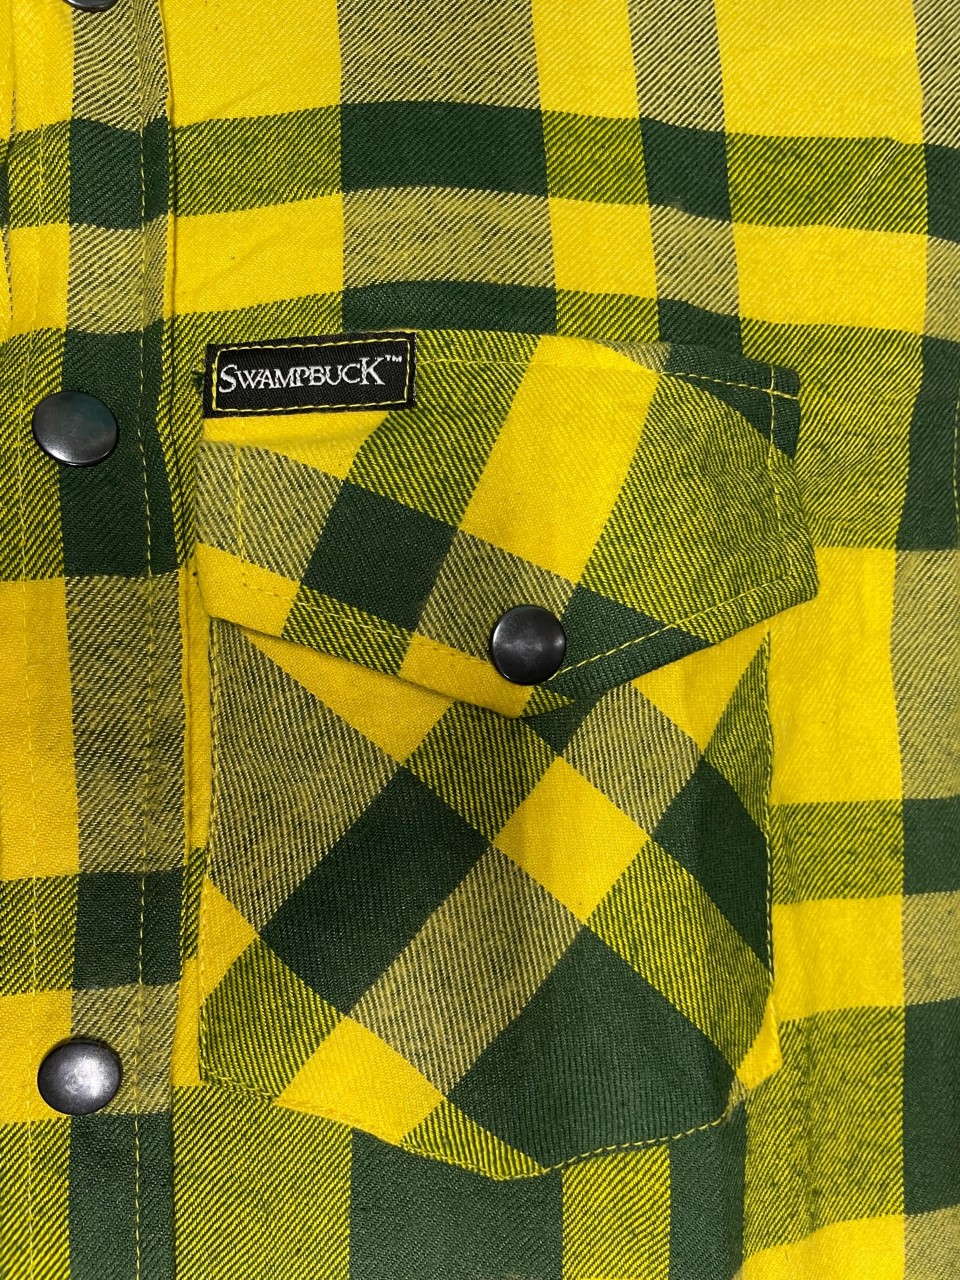 NEW – Green and Gold Flannel shirt! | Swamp Buck Camo